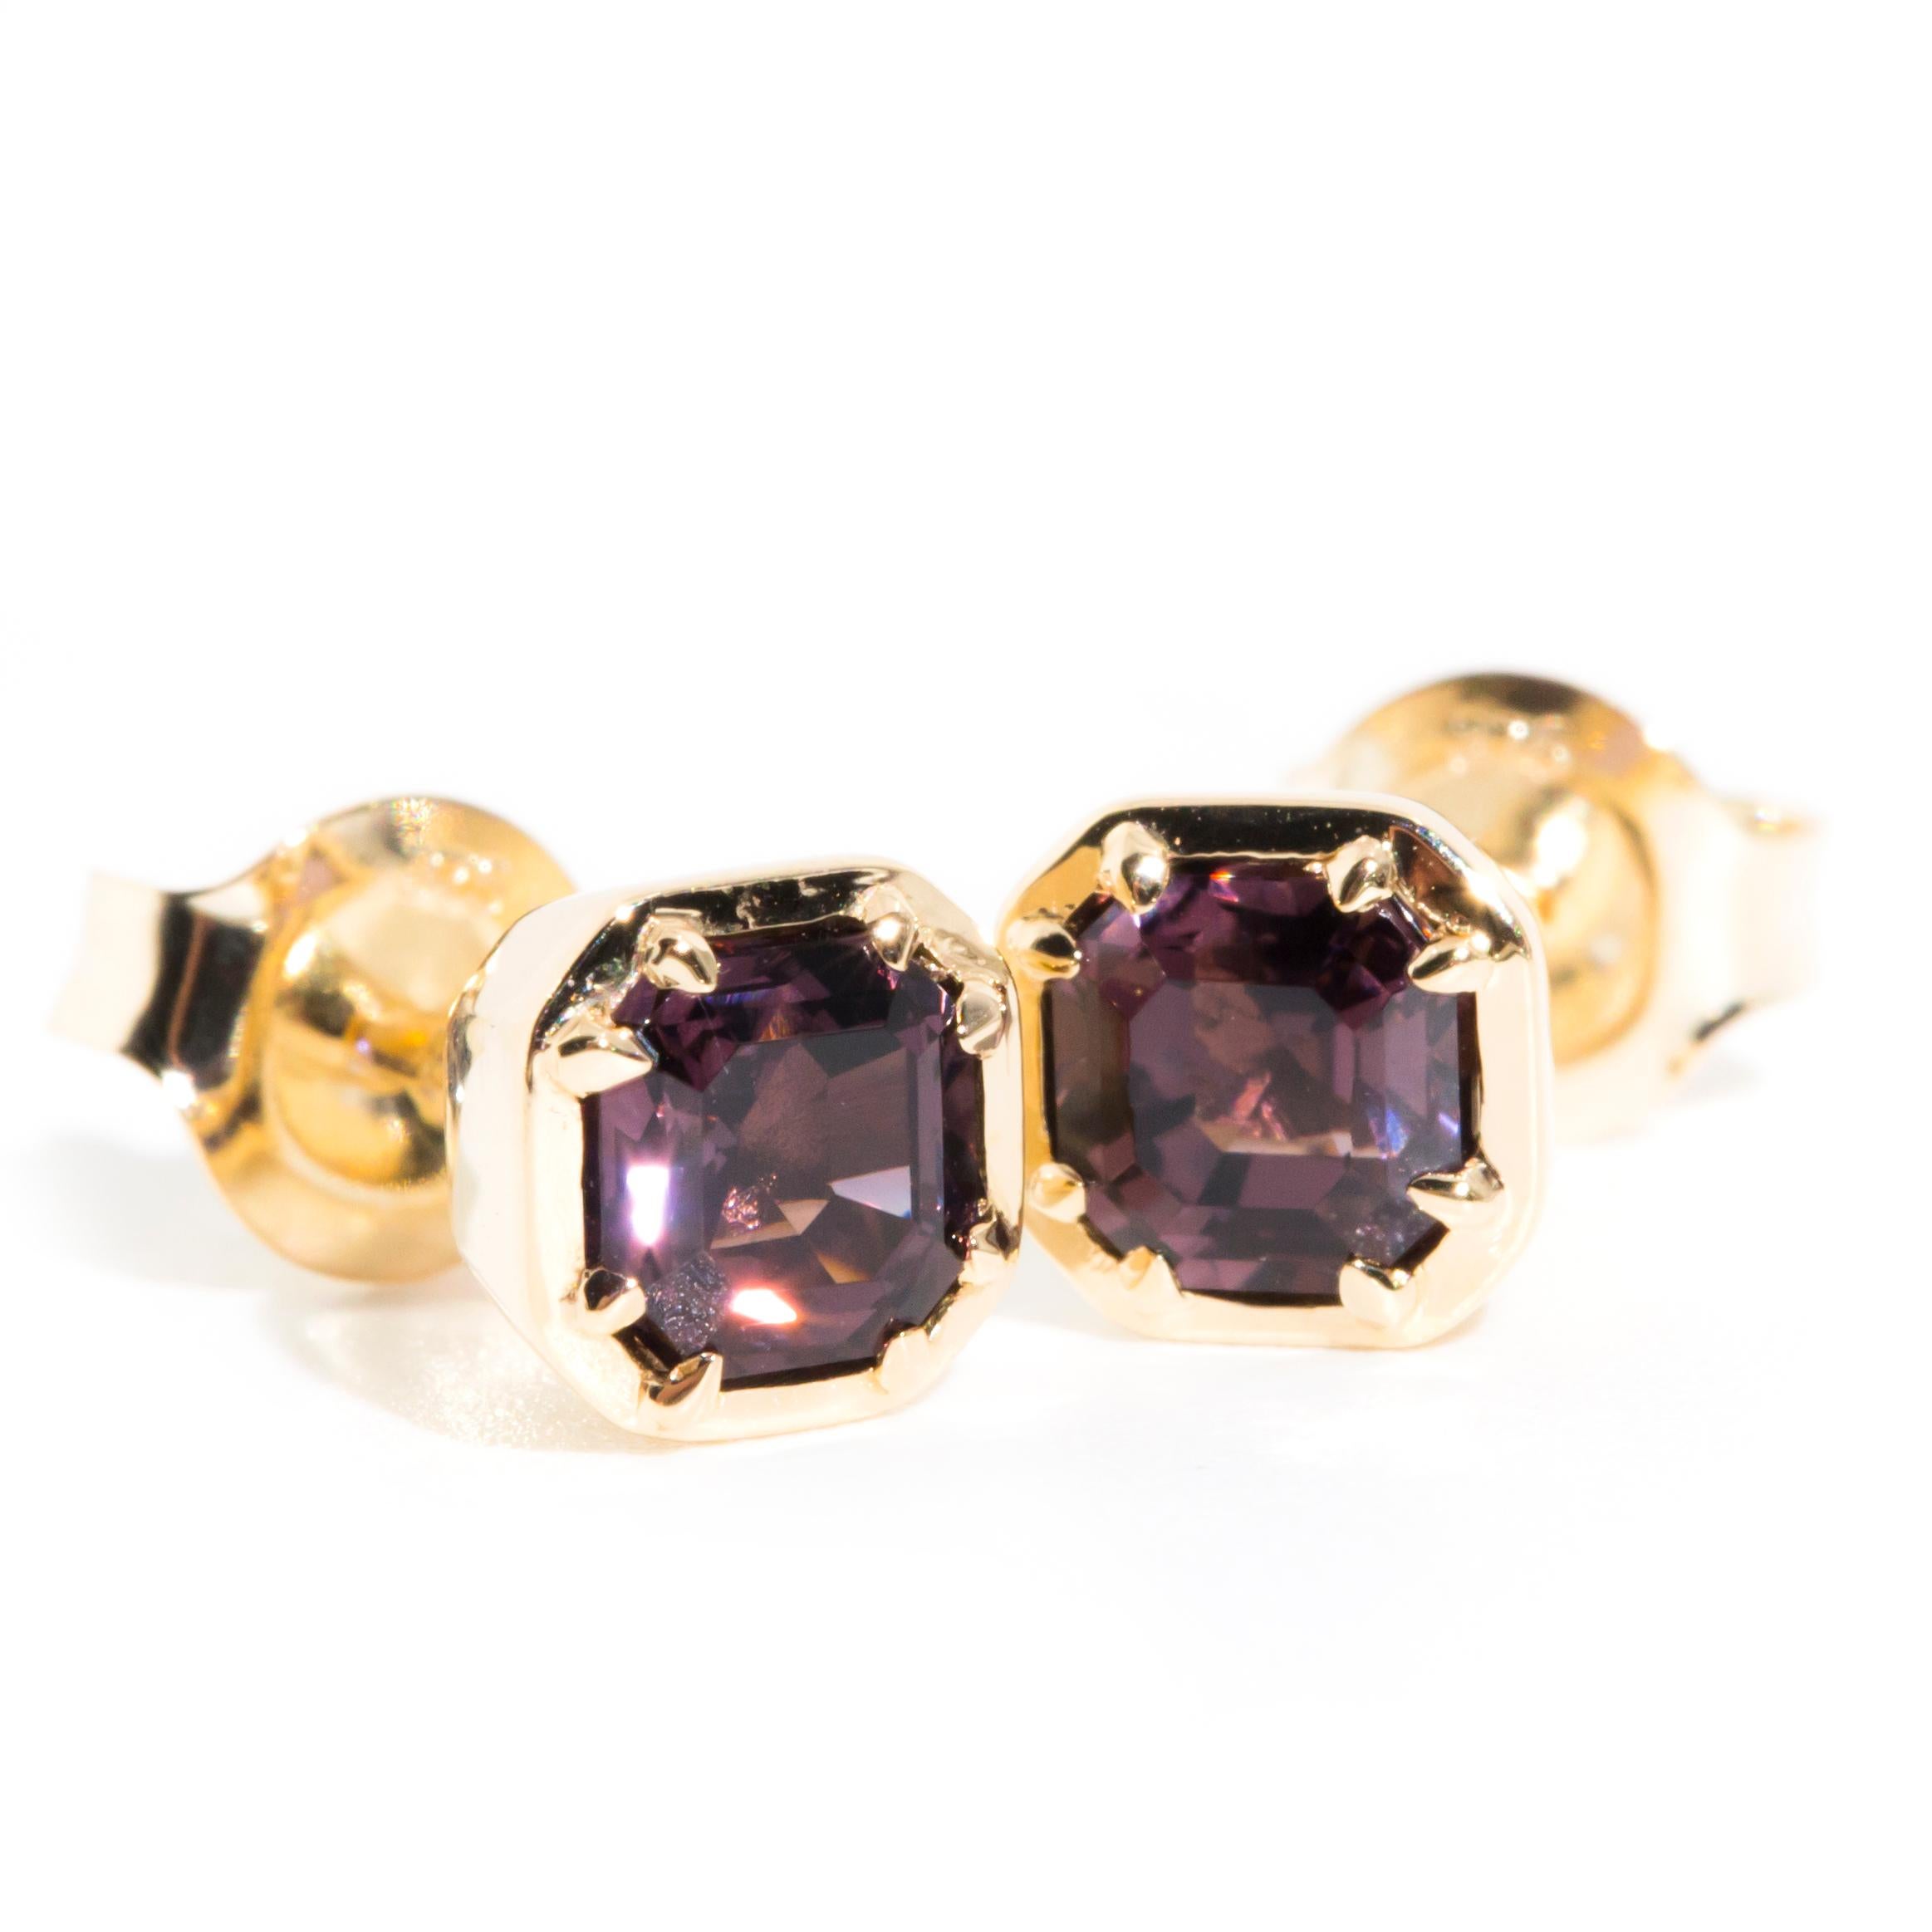 Asscher Cut Deep Pink Spinel Contemporary Stud Style Earrings in 9 Carat Yellow Gold For Sale